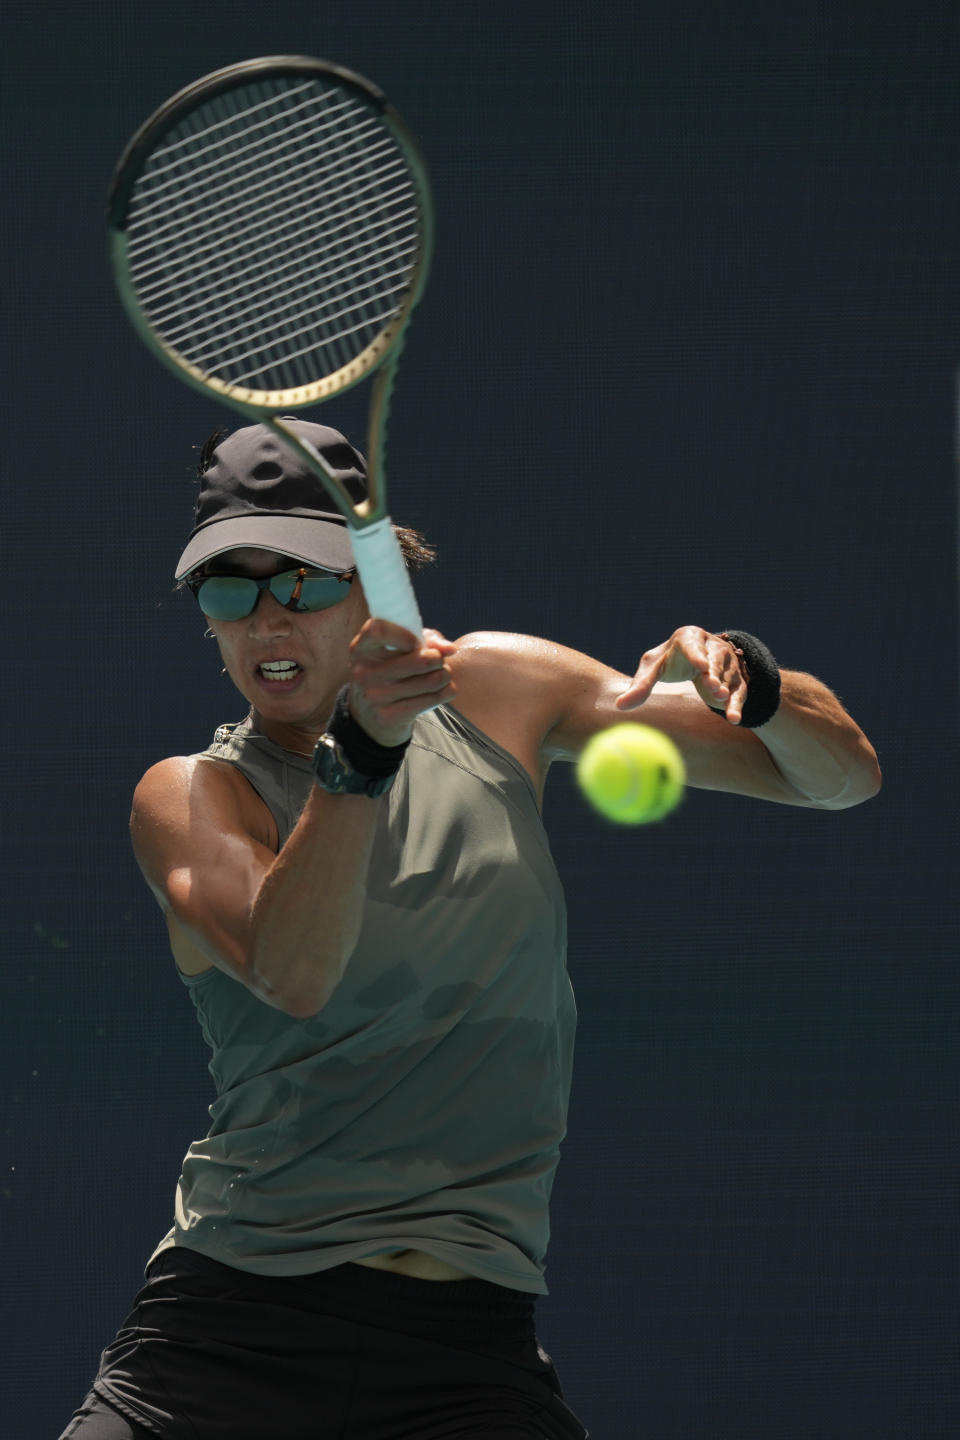 Astra Sharma of Australia returns a ball in her first round women's match against Naomi Osaka of Japan, at the Miami Open tennis tournament, Wednesday, March 23, 2022, in Miami Gardens, Fla. (AP Photo/Rebecca Blackwell)